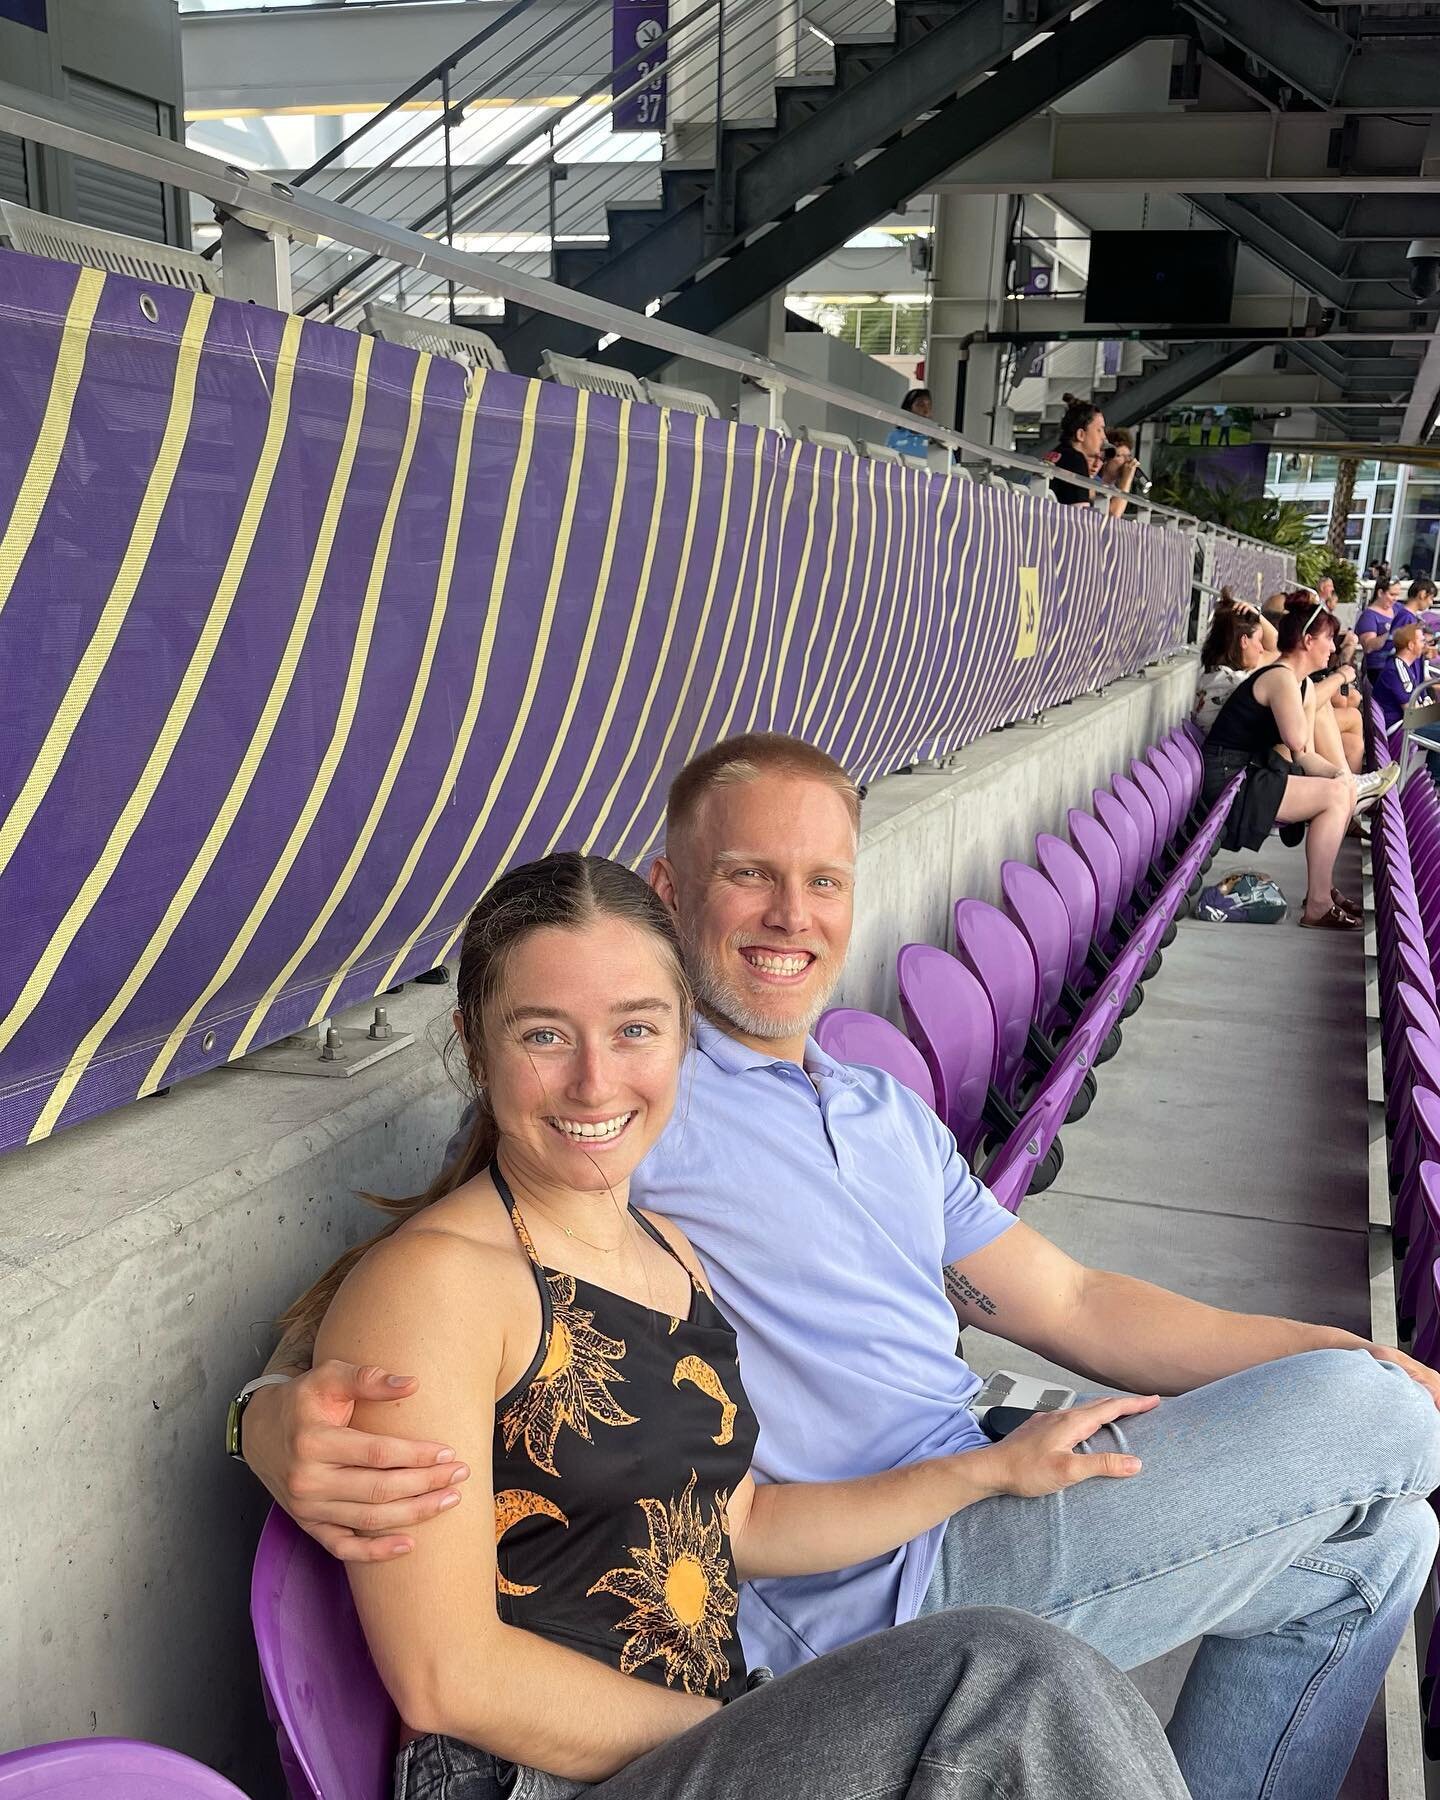 ⚽️🥩🍒 Weekends like this one &gt;&gt;&gt; 

Realized this was my first time at a Pro sporting event. Newbie here 🙋🏼&zwj;♀️

#orlandocitysoccer #ocs